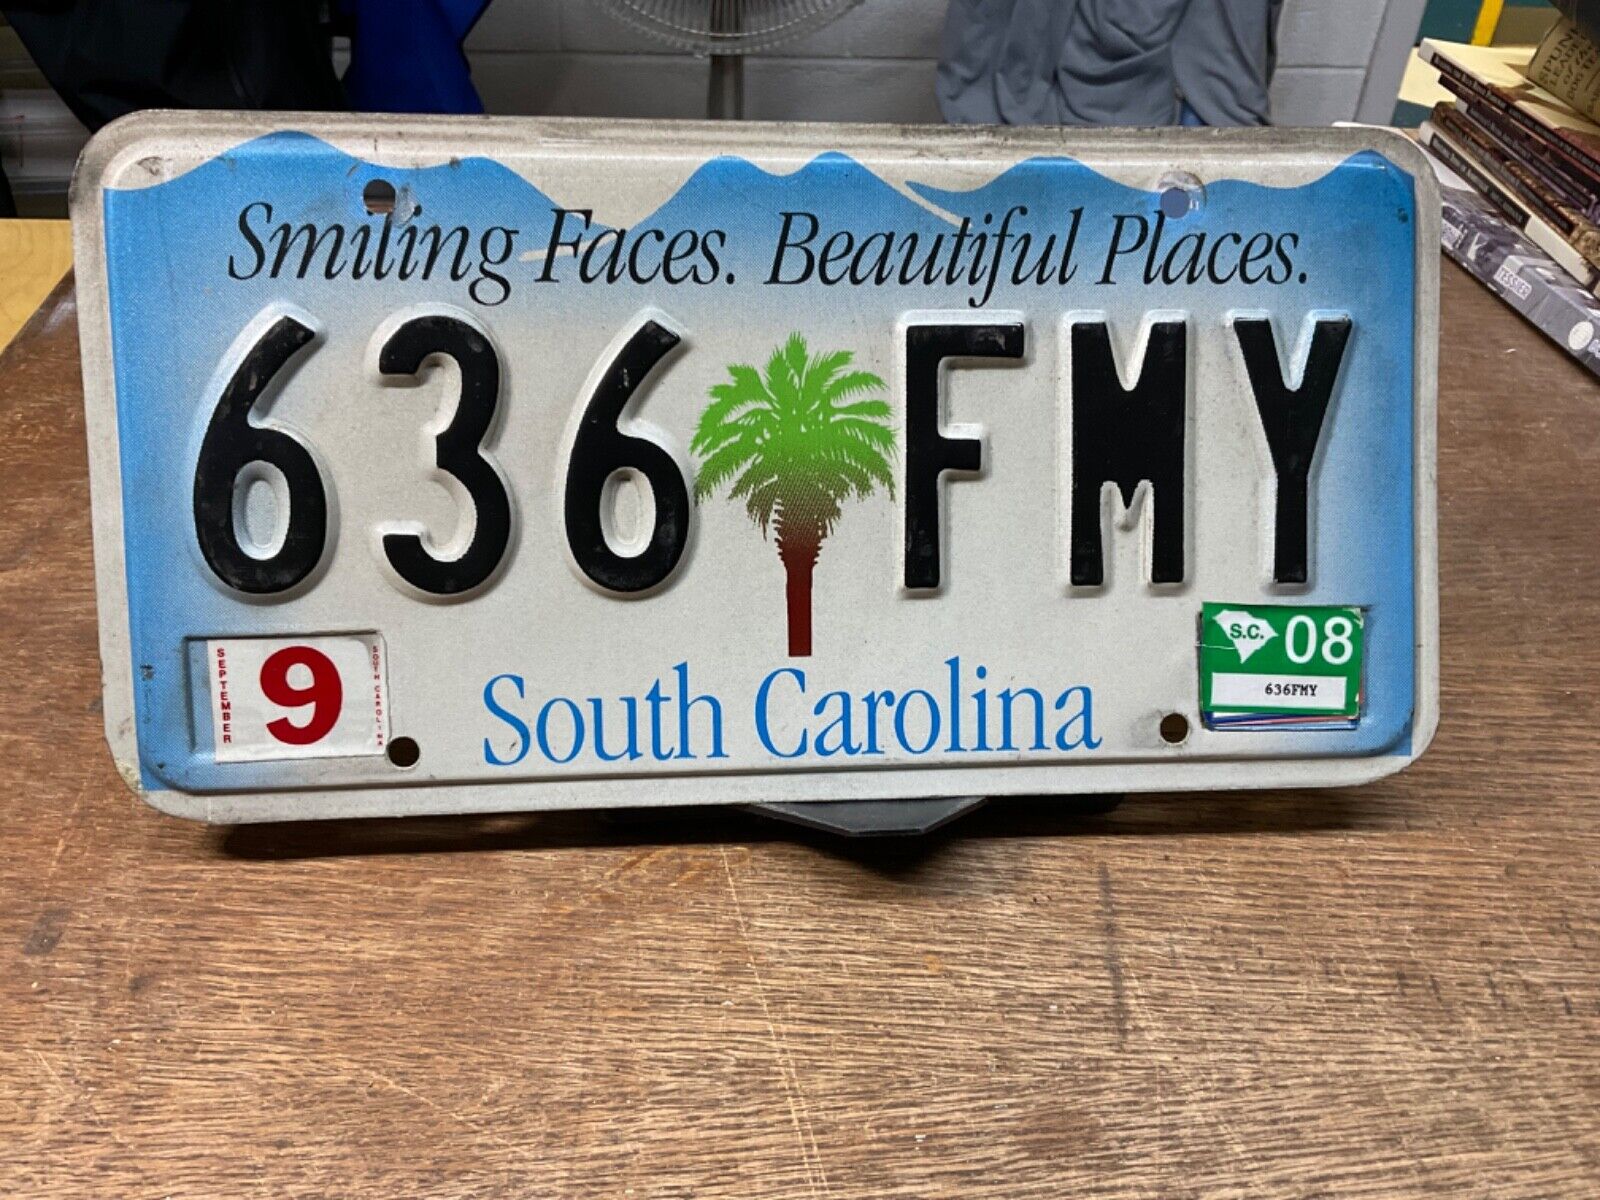 License Plate Tag Vintage South Carolina SC “Smiling Faces” 636 FMY 2008 Rustic